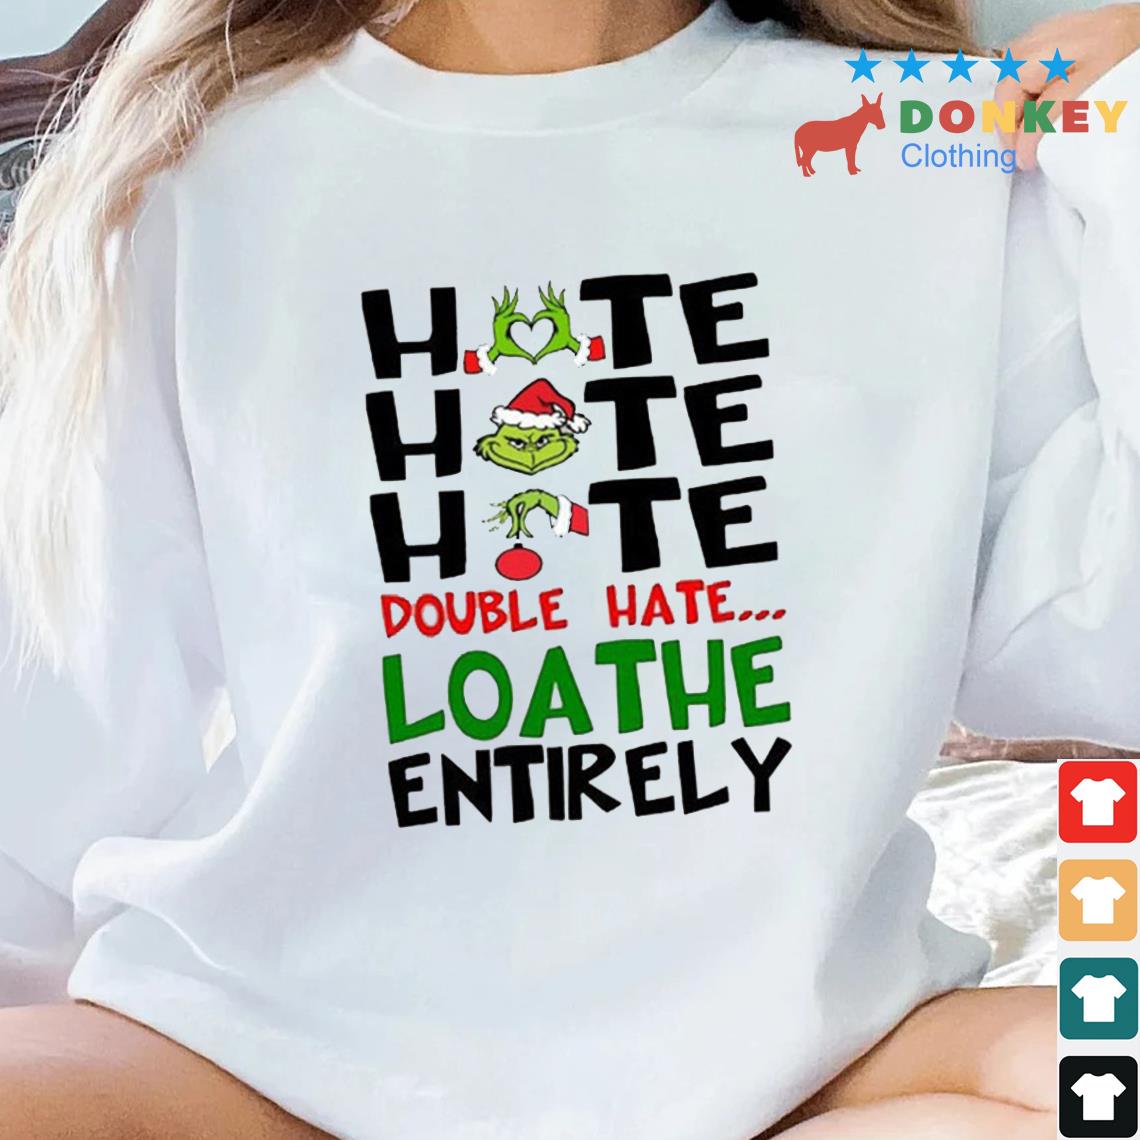 The Grinch Hate Hate Hate Double Hate Loathe Entirely Christmas Sweater